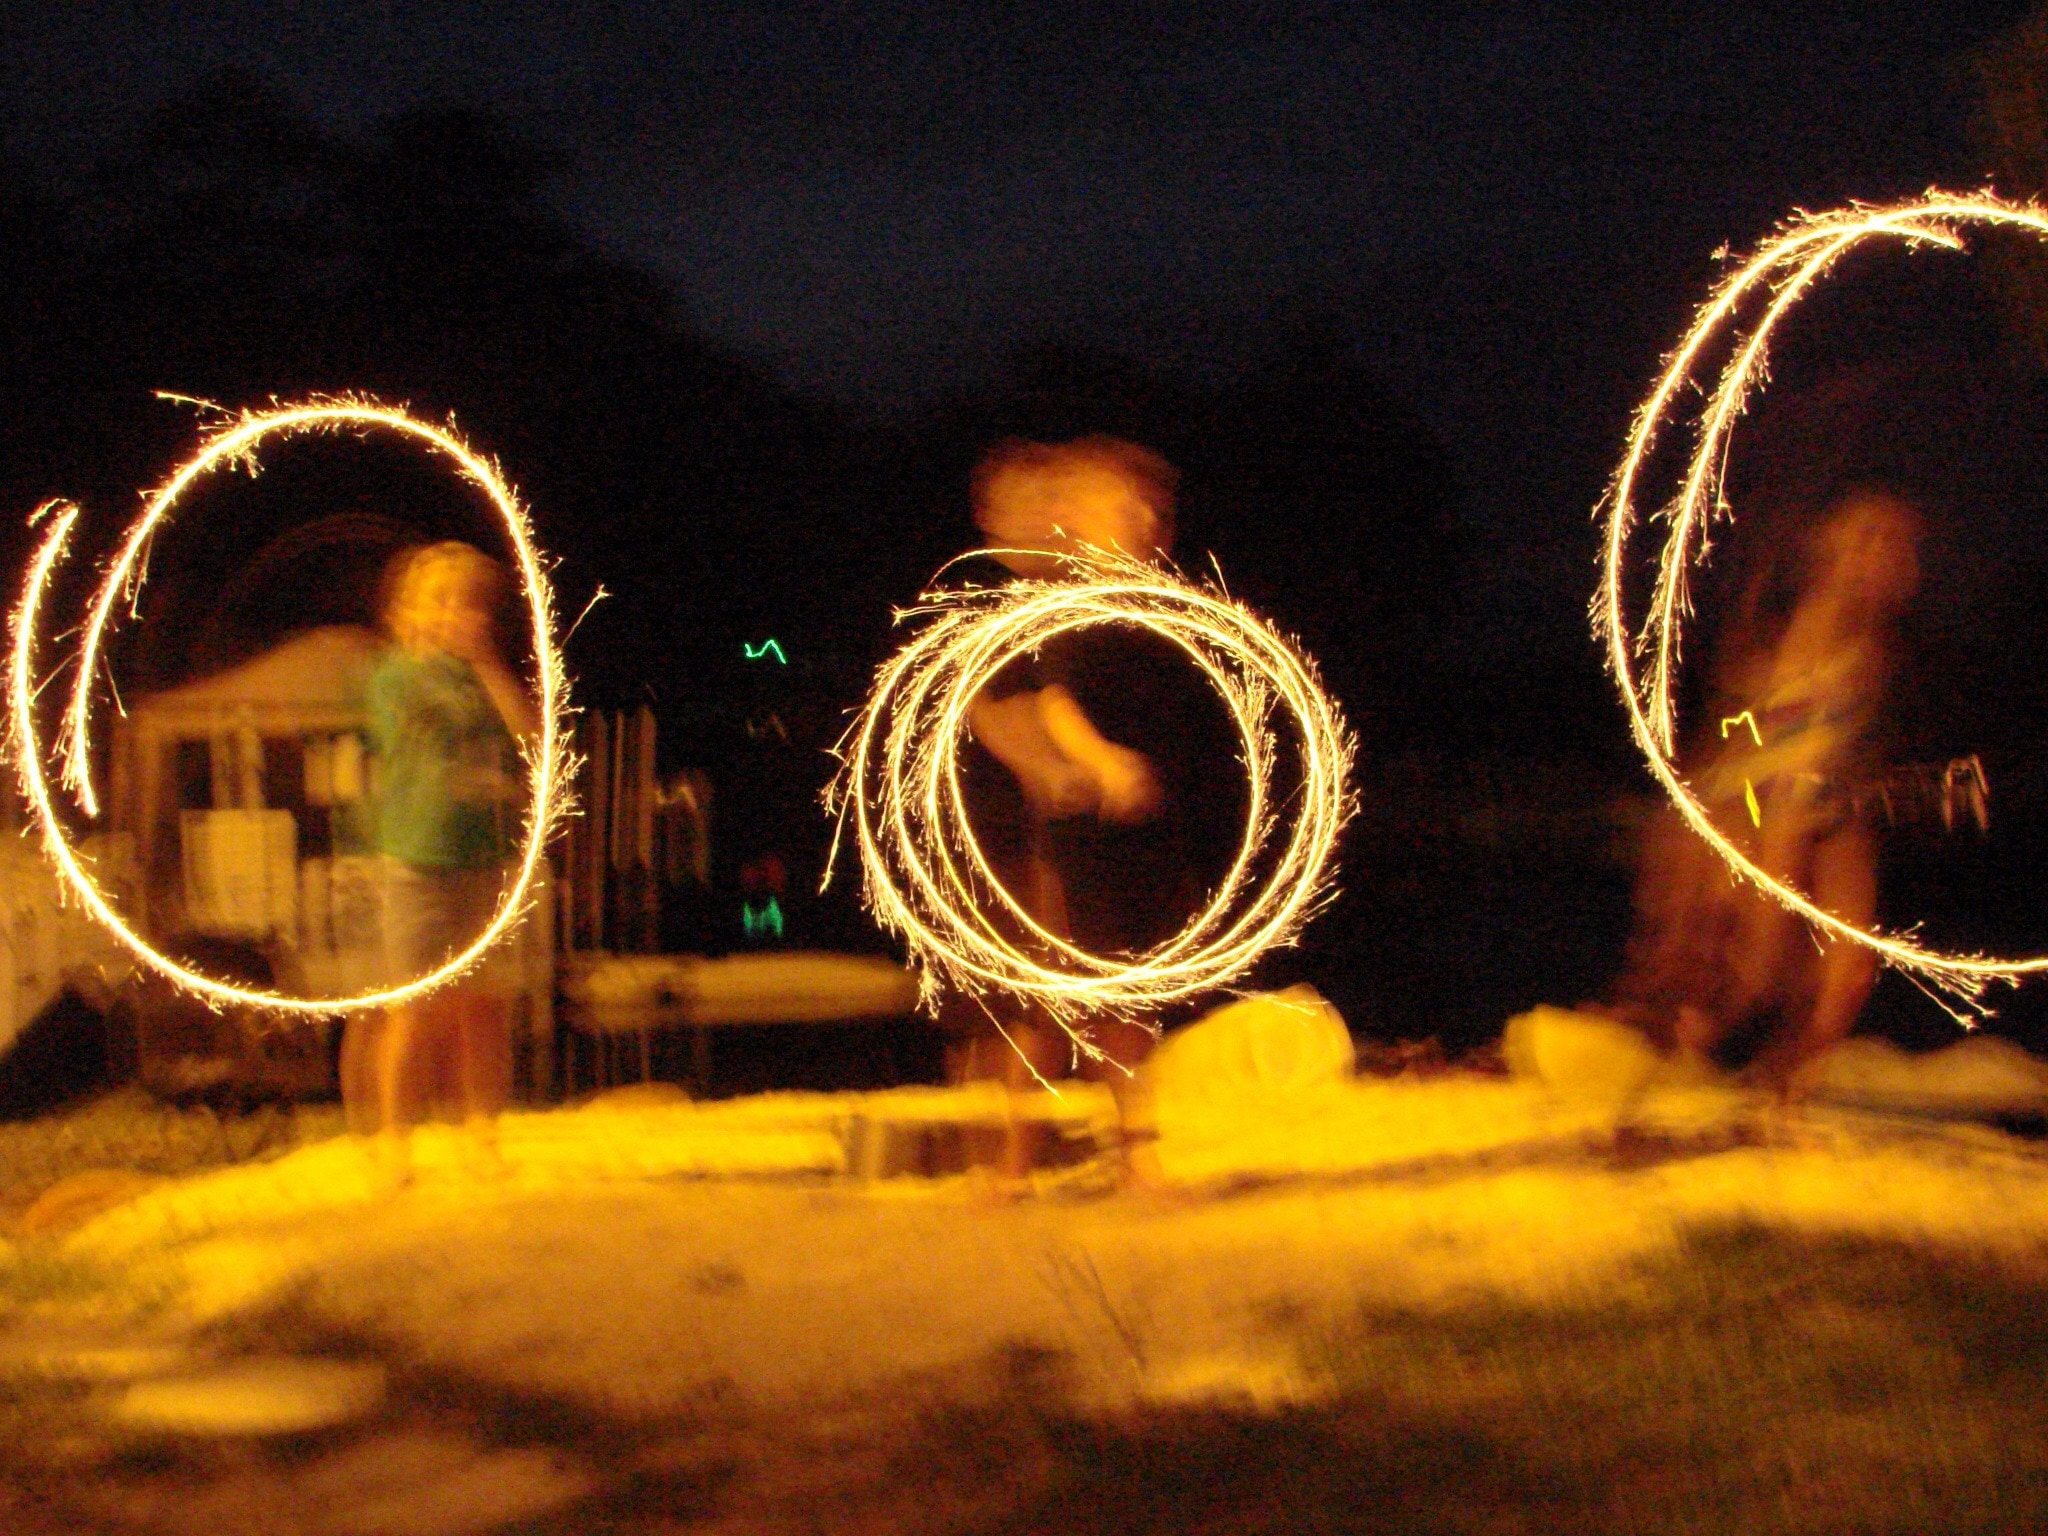 three persons making circular shape with fireworks